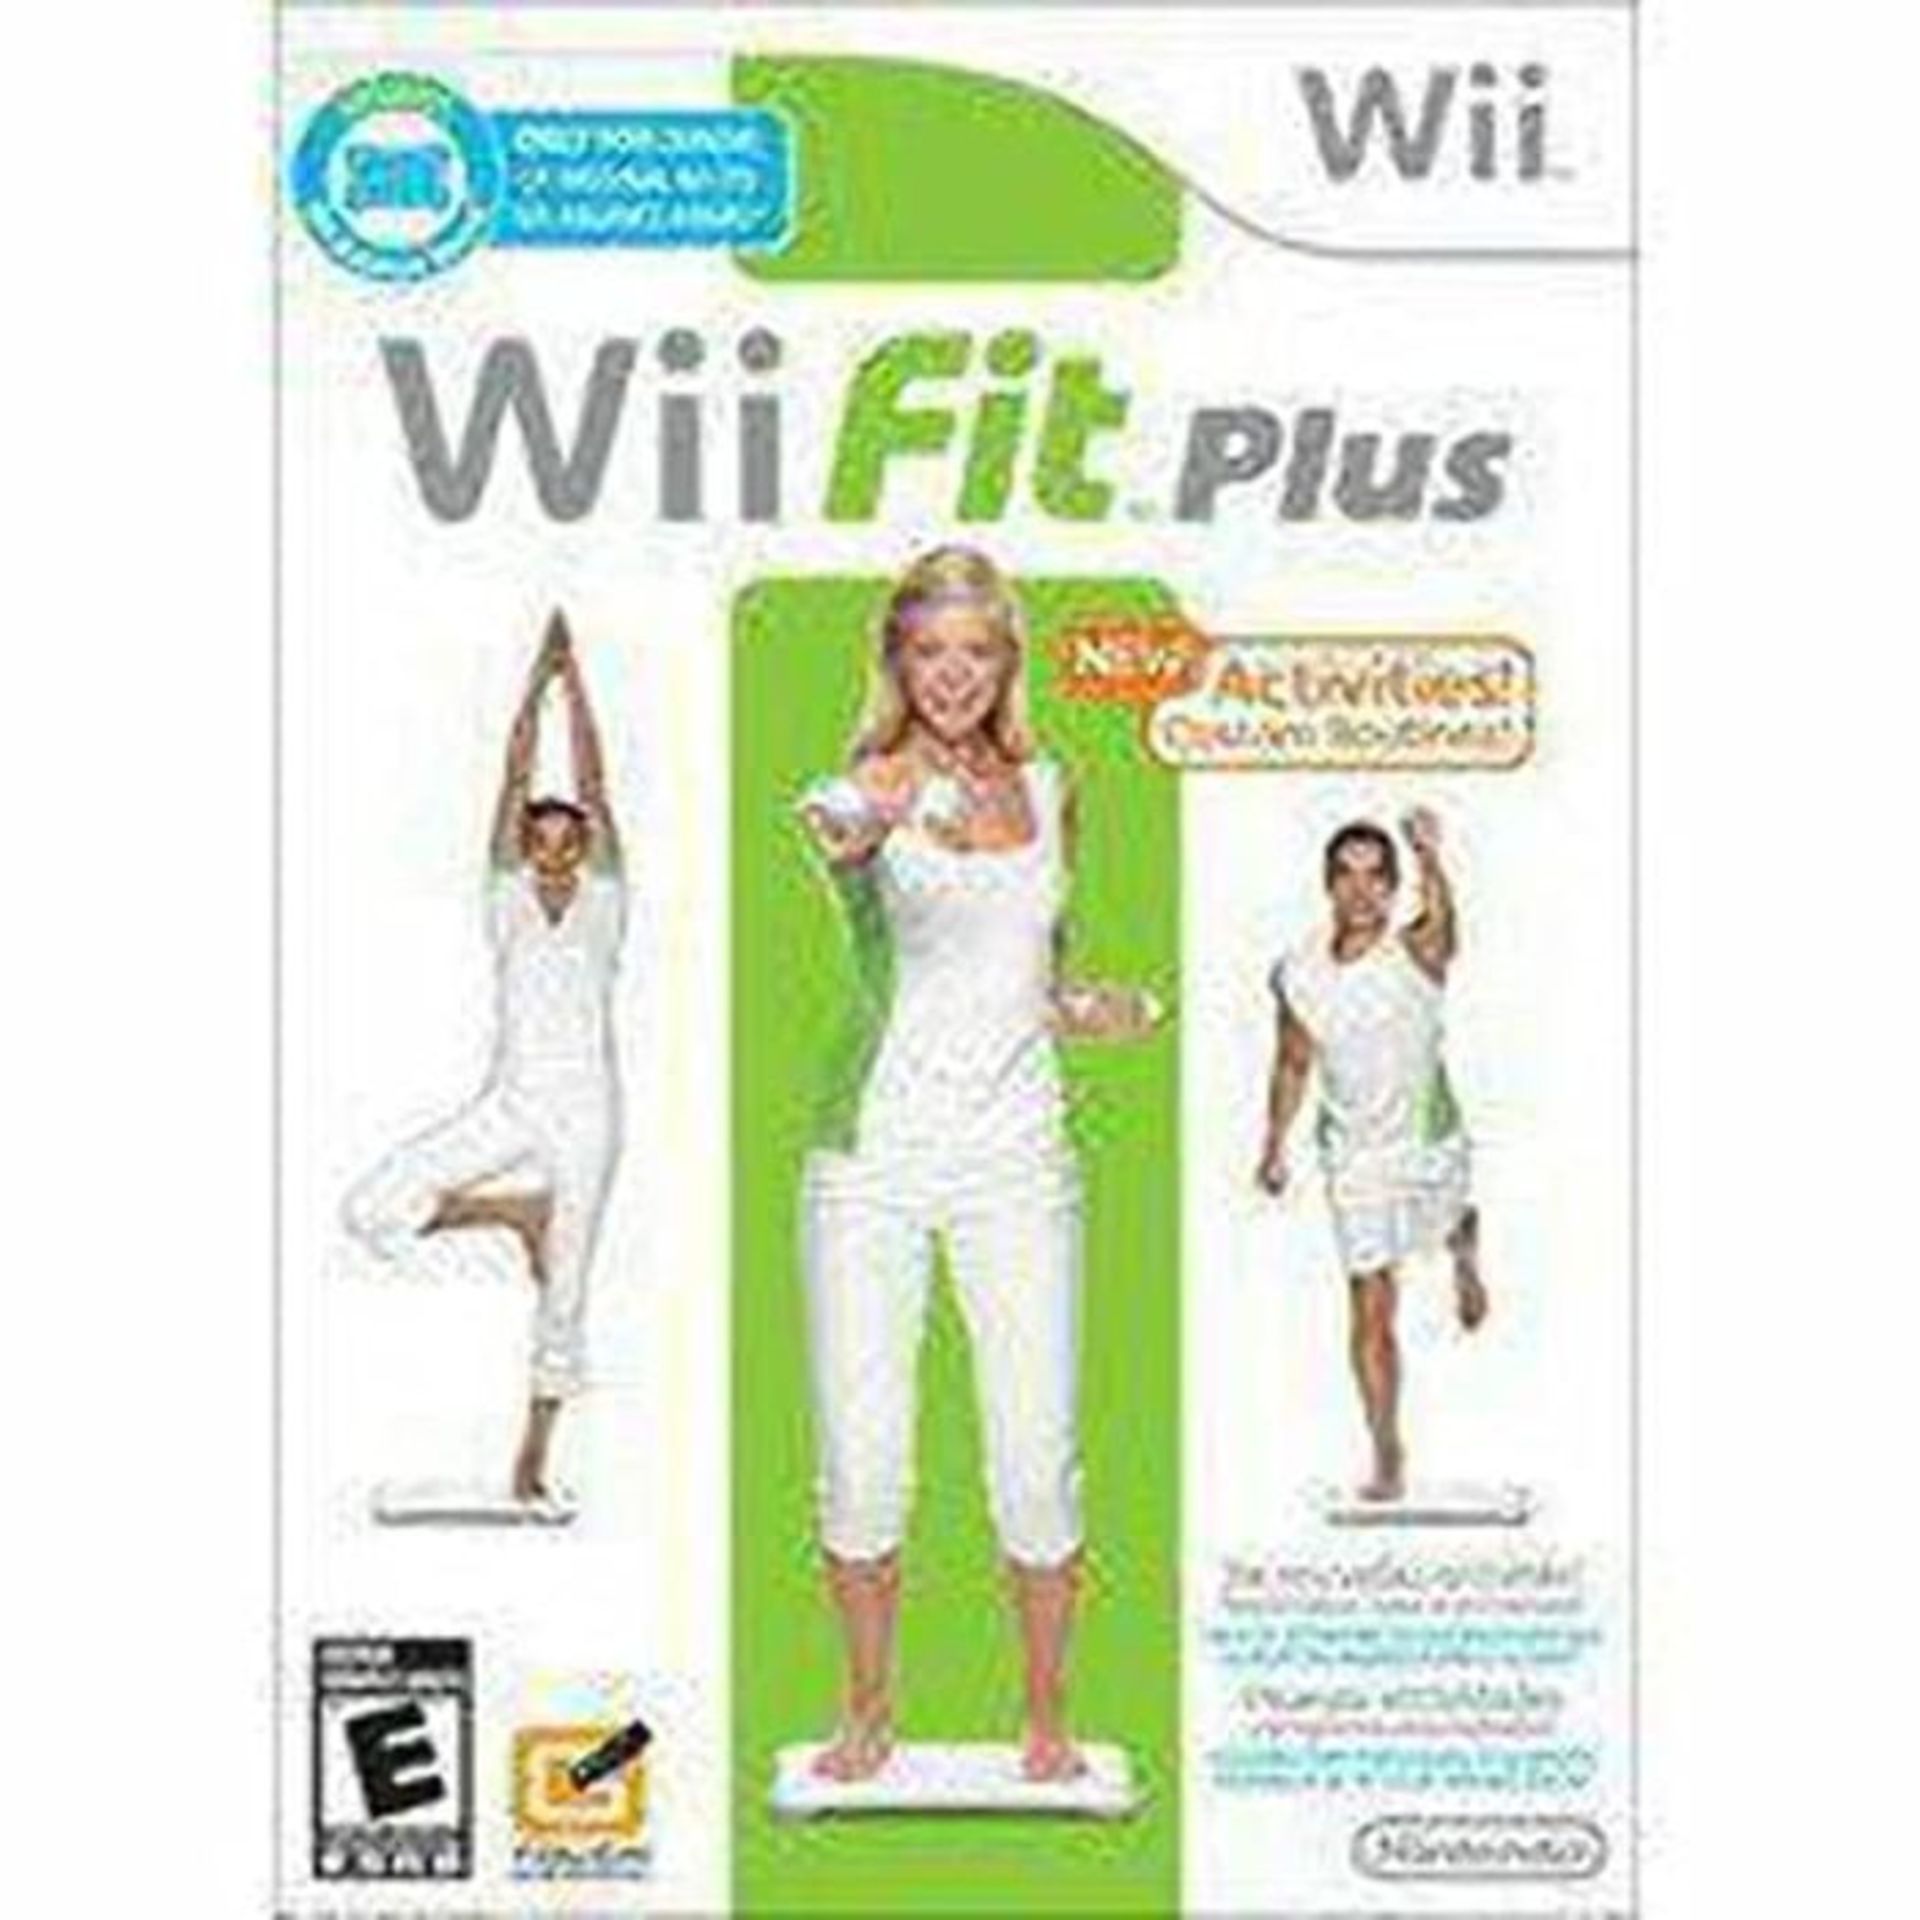 Wii Fit Plus game - Image 4 of 6